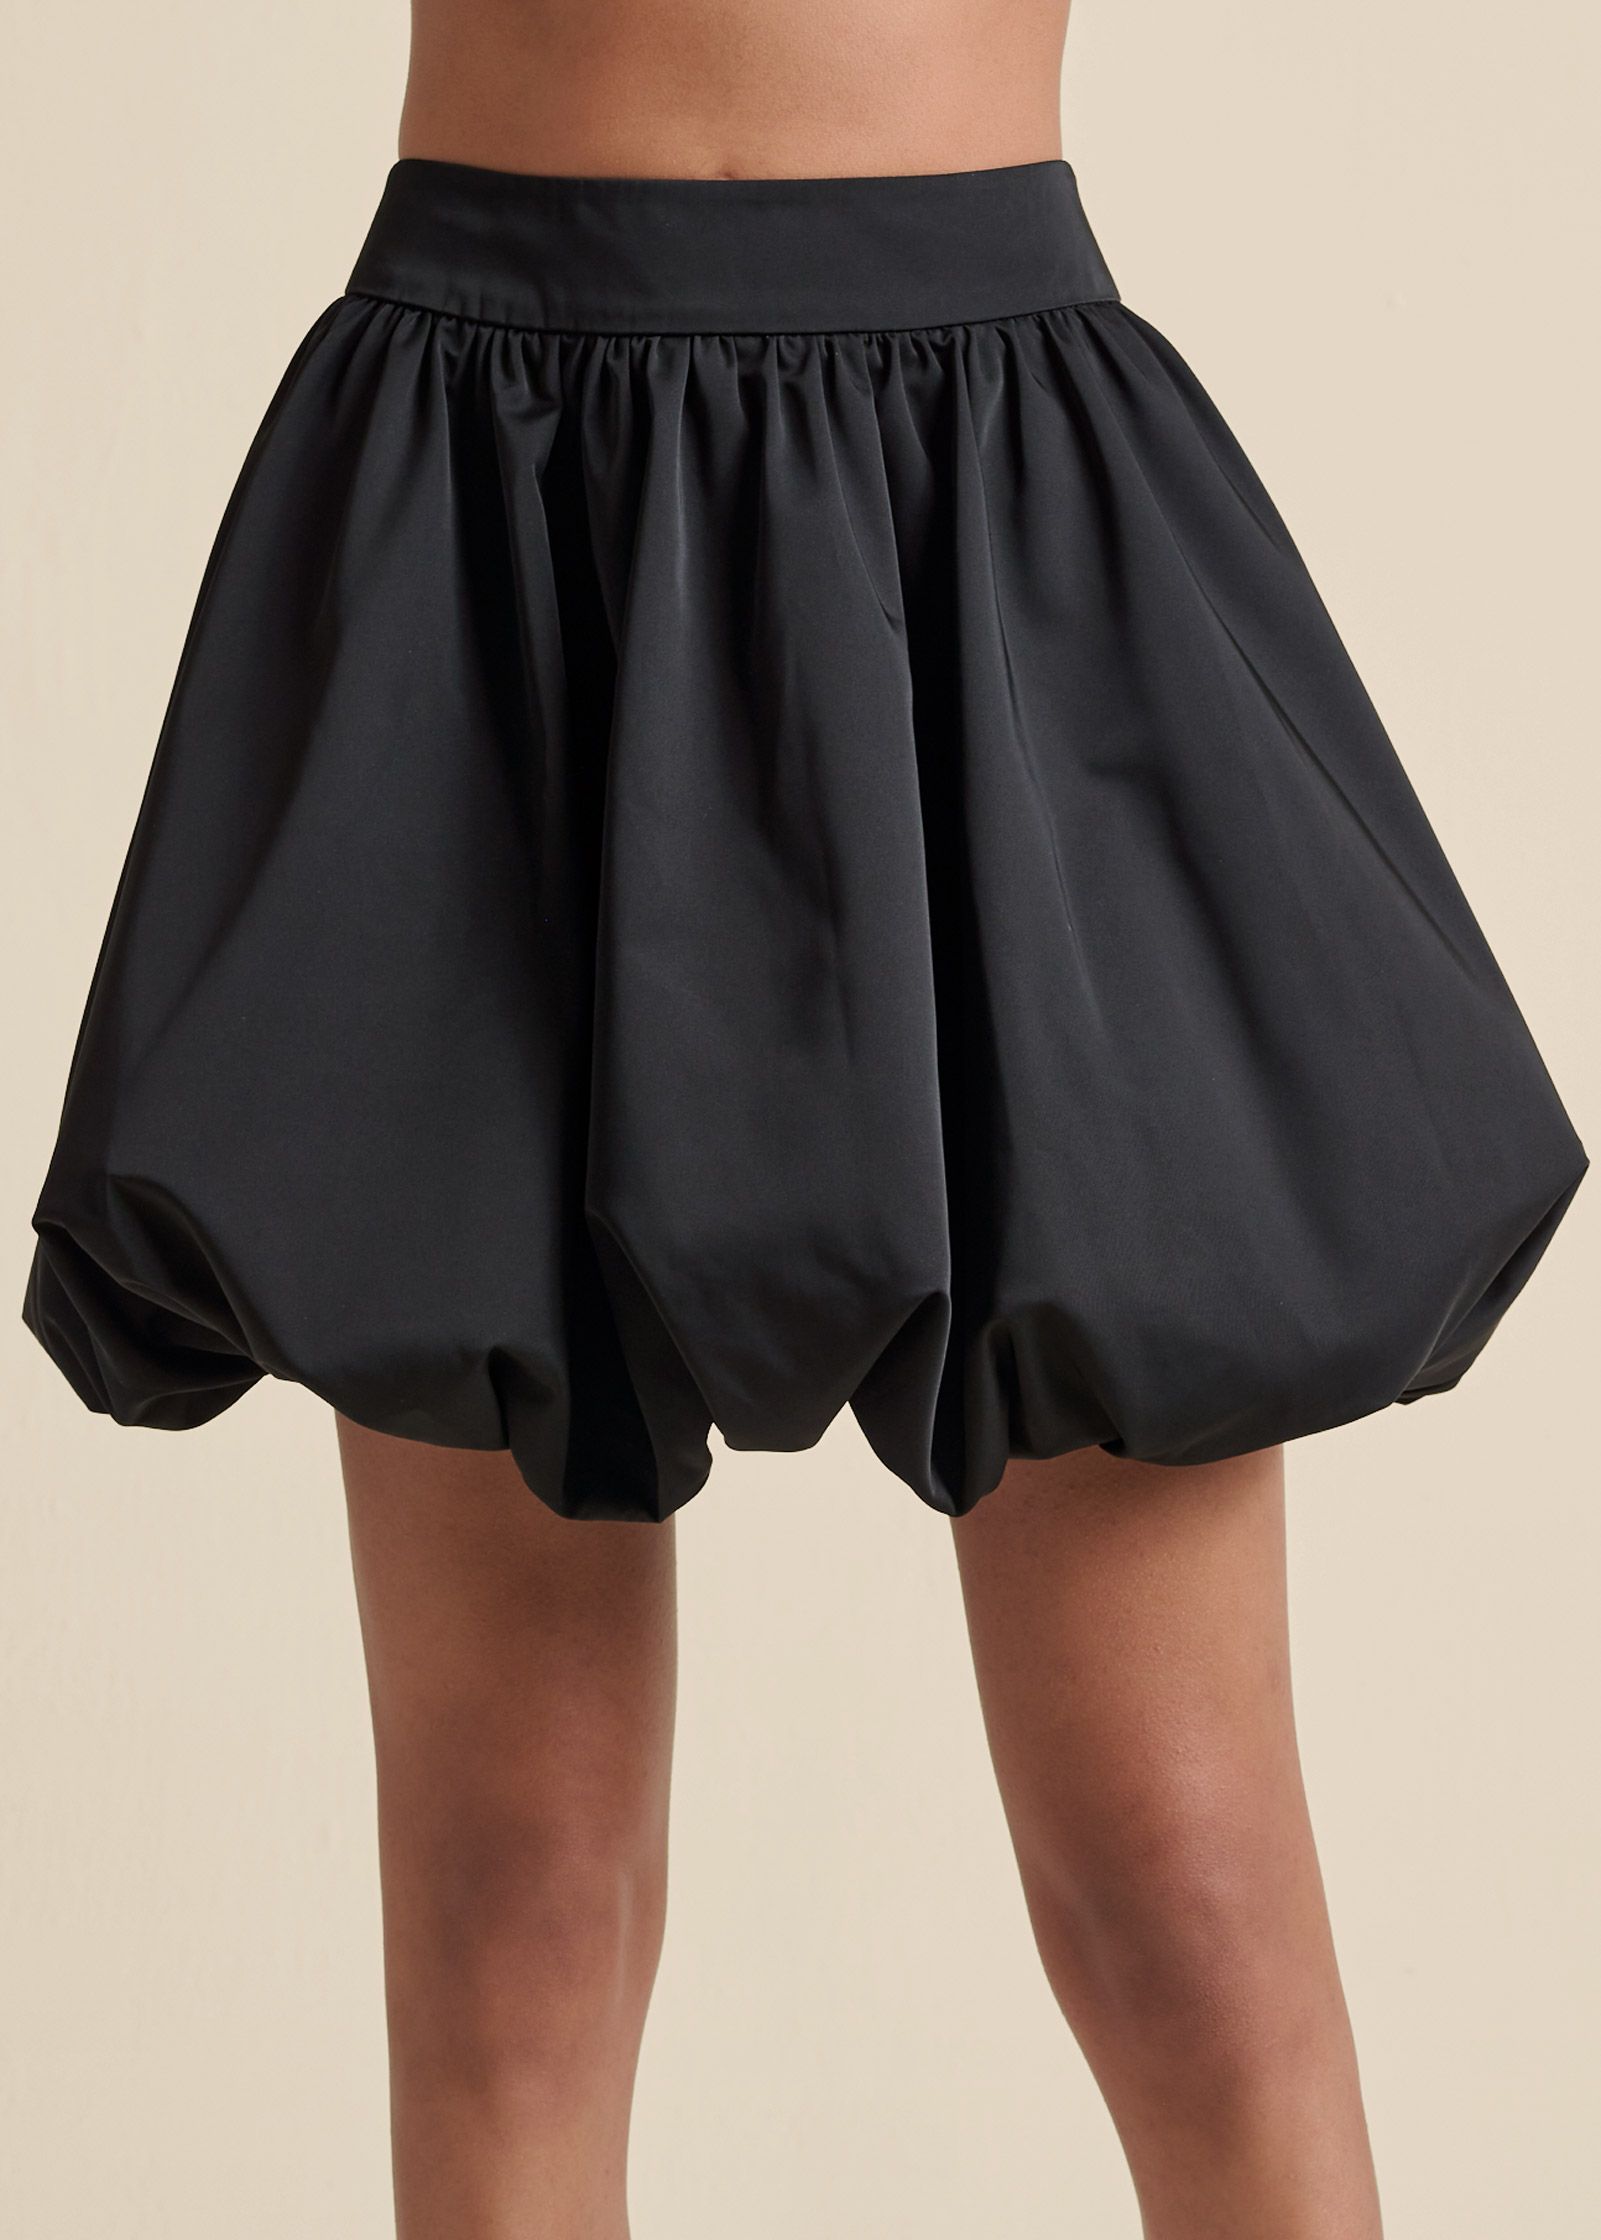 Bubbly and Playful: Embracing the Fun of Bubble Skirts